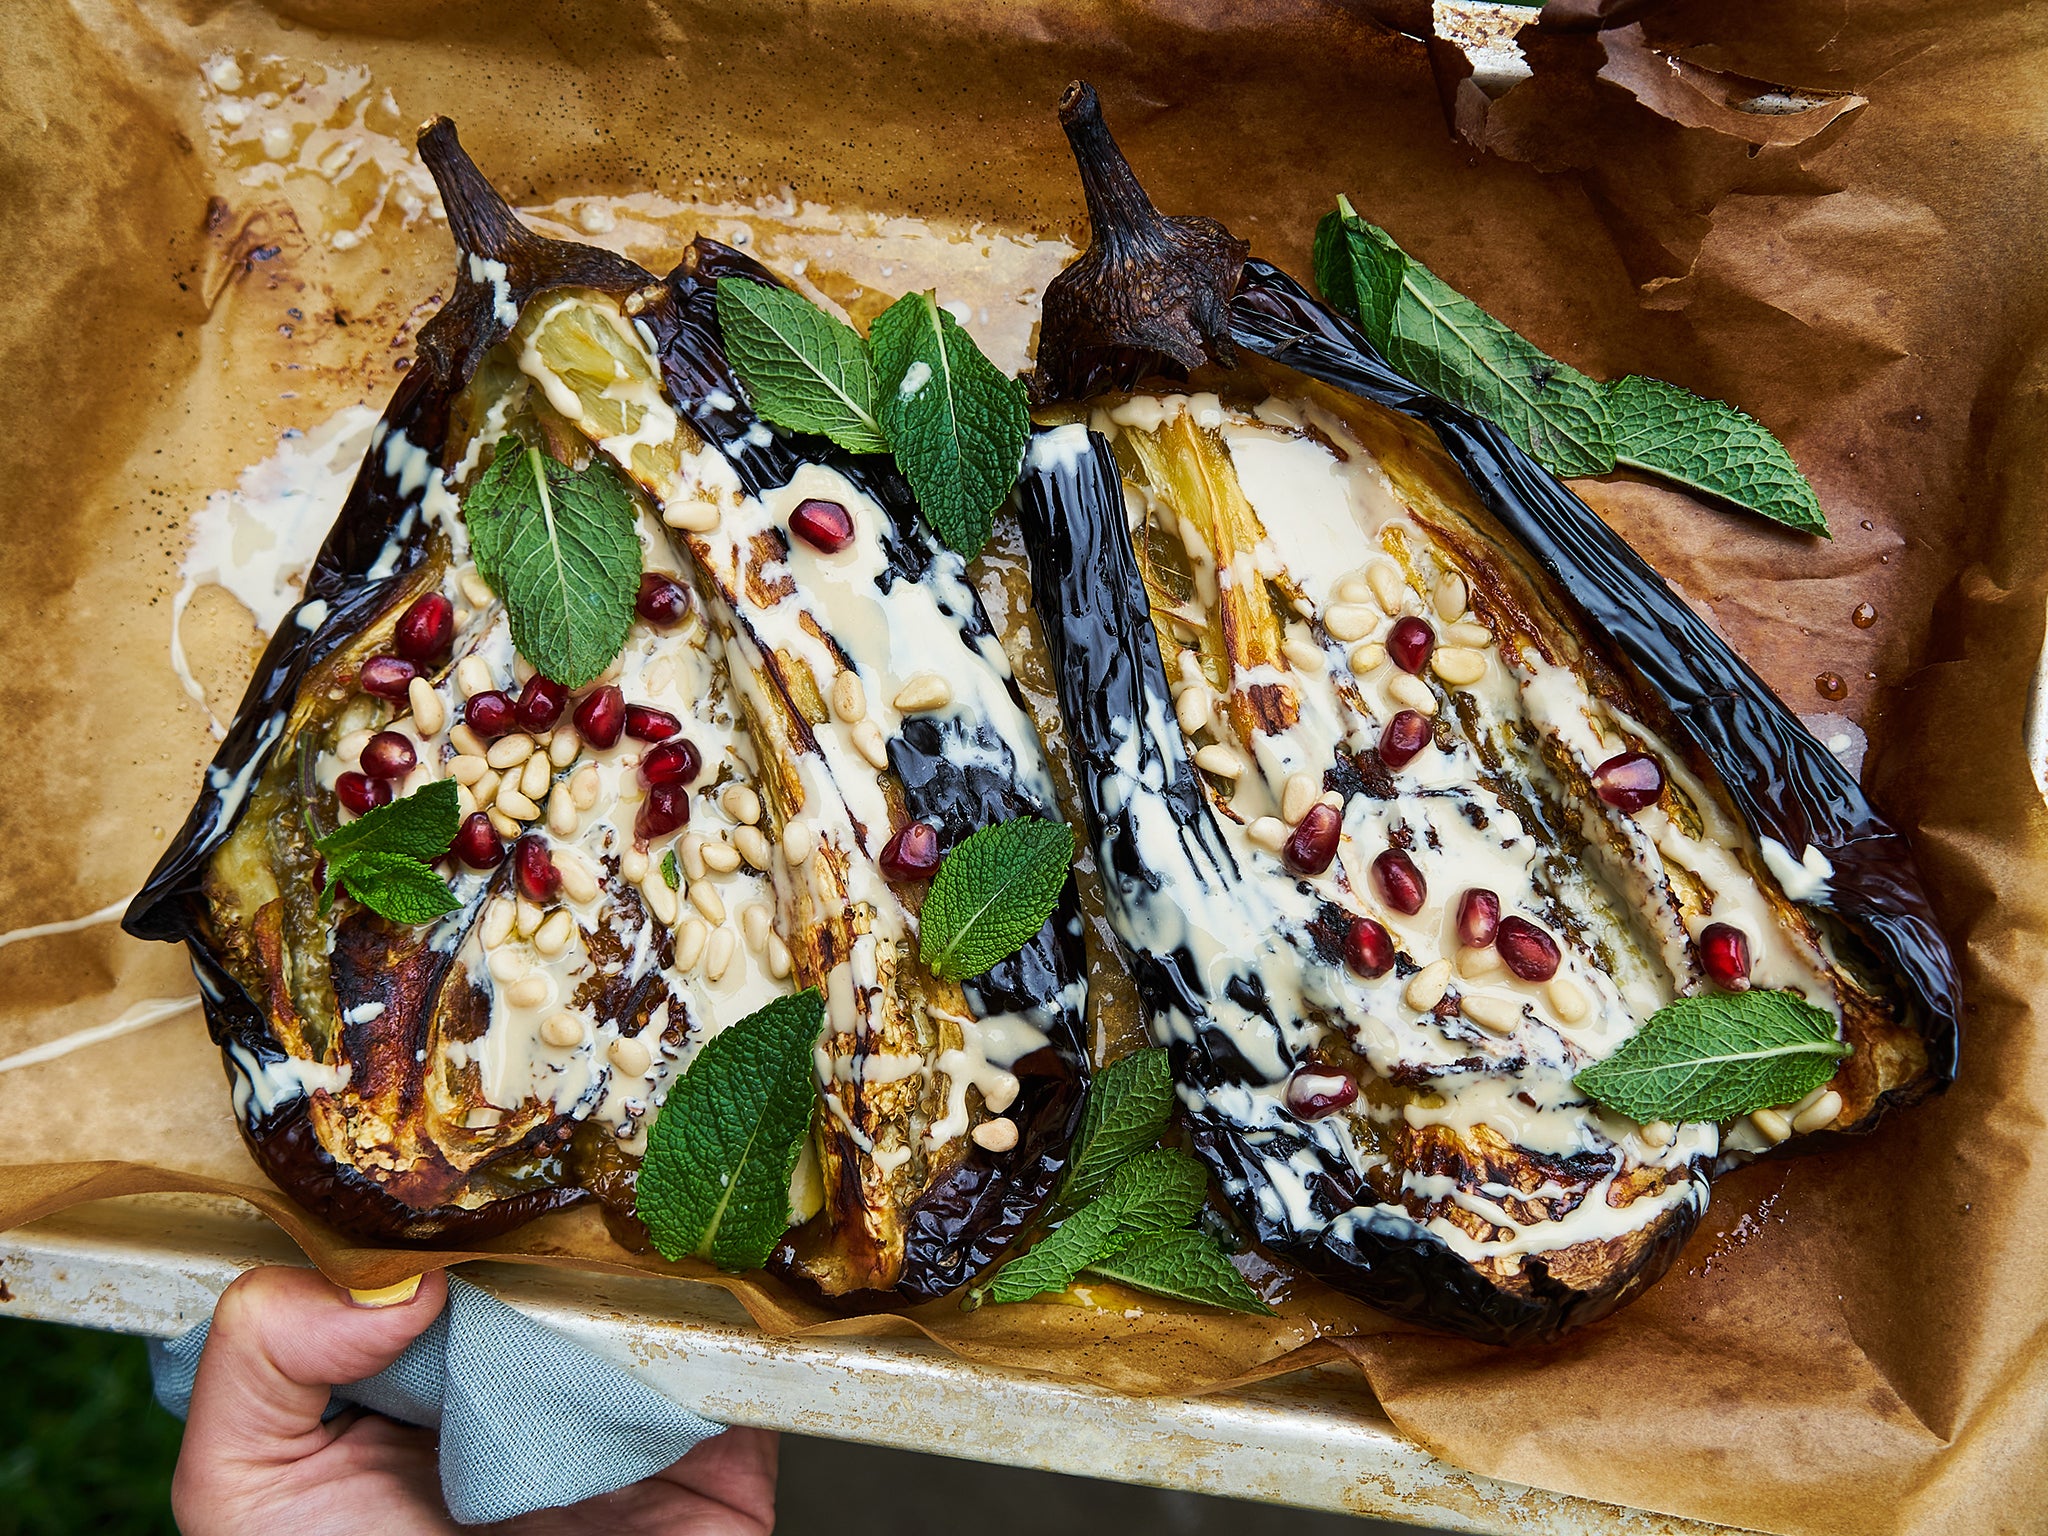 When grilled, the aubergines develop a tender, creamy texture with a slightly smoky char, enhancing their natural taste